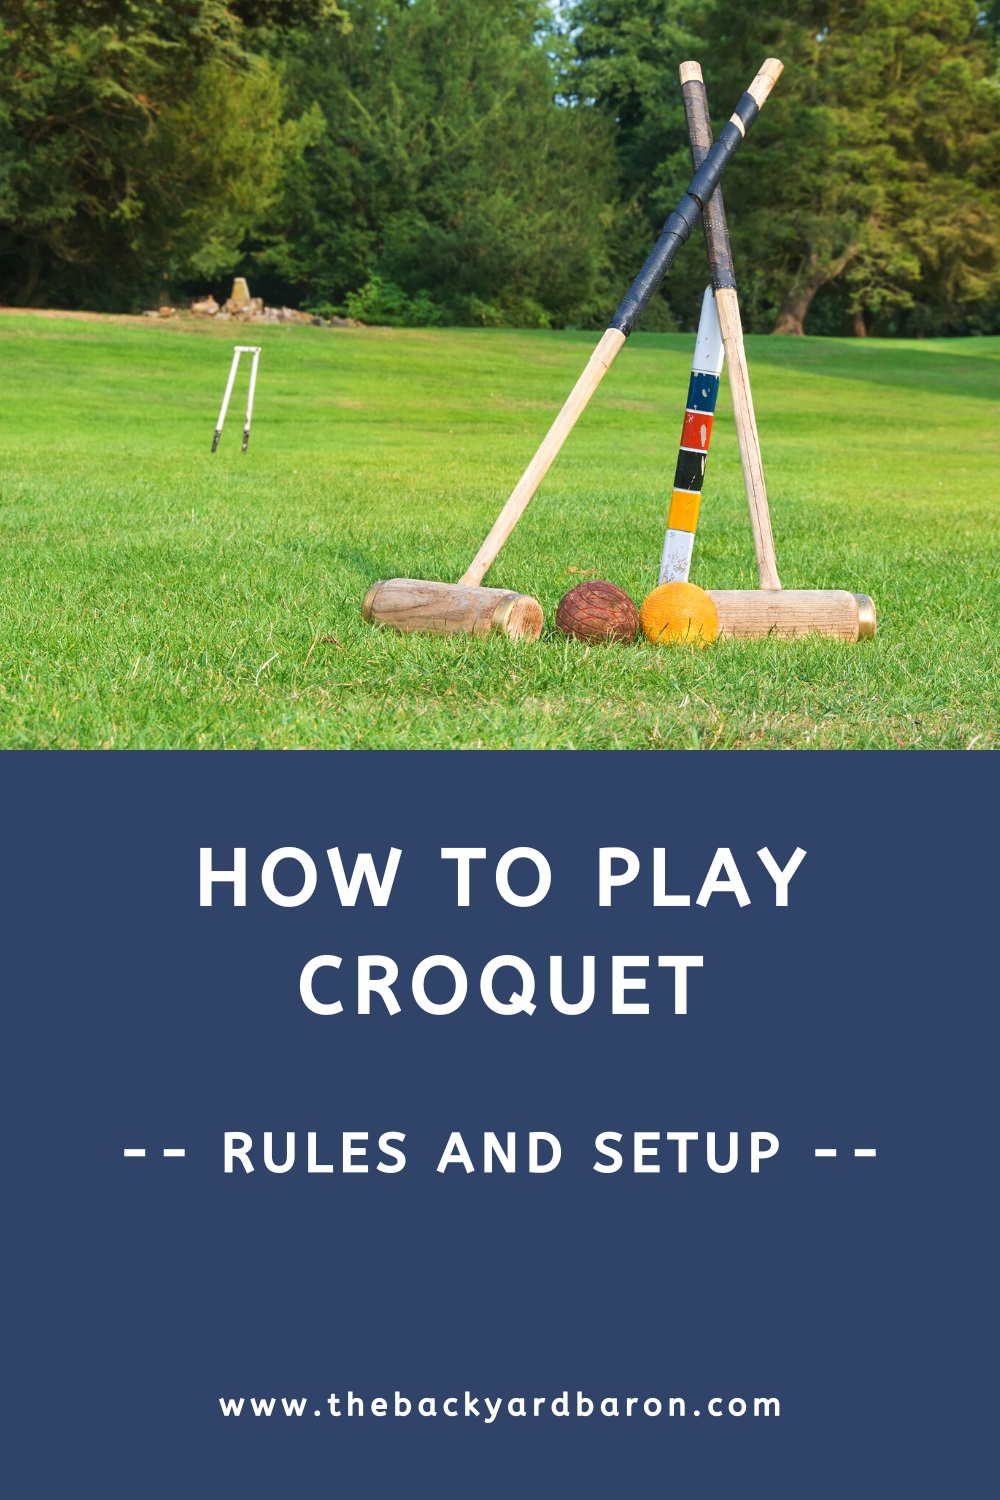 How to play croquet (rules and field setup)